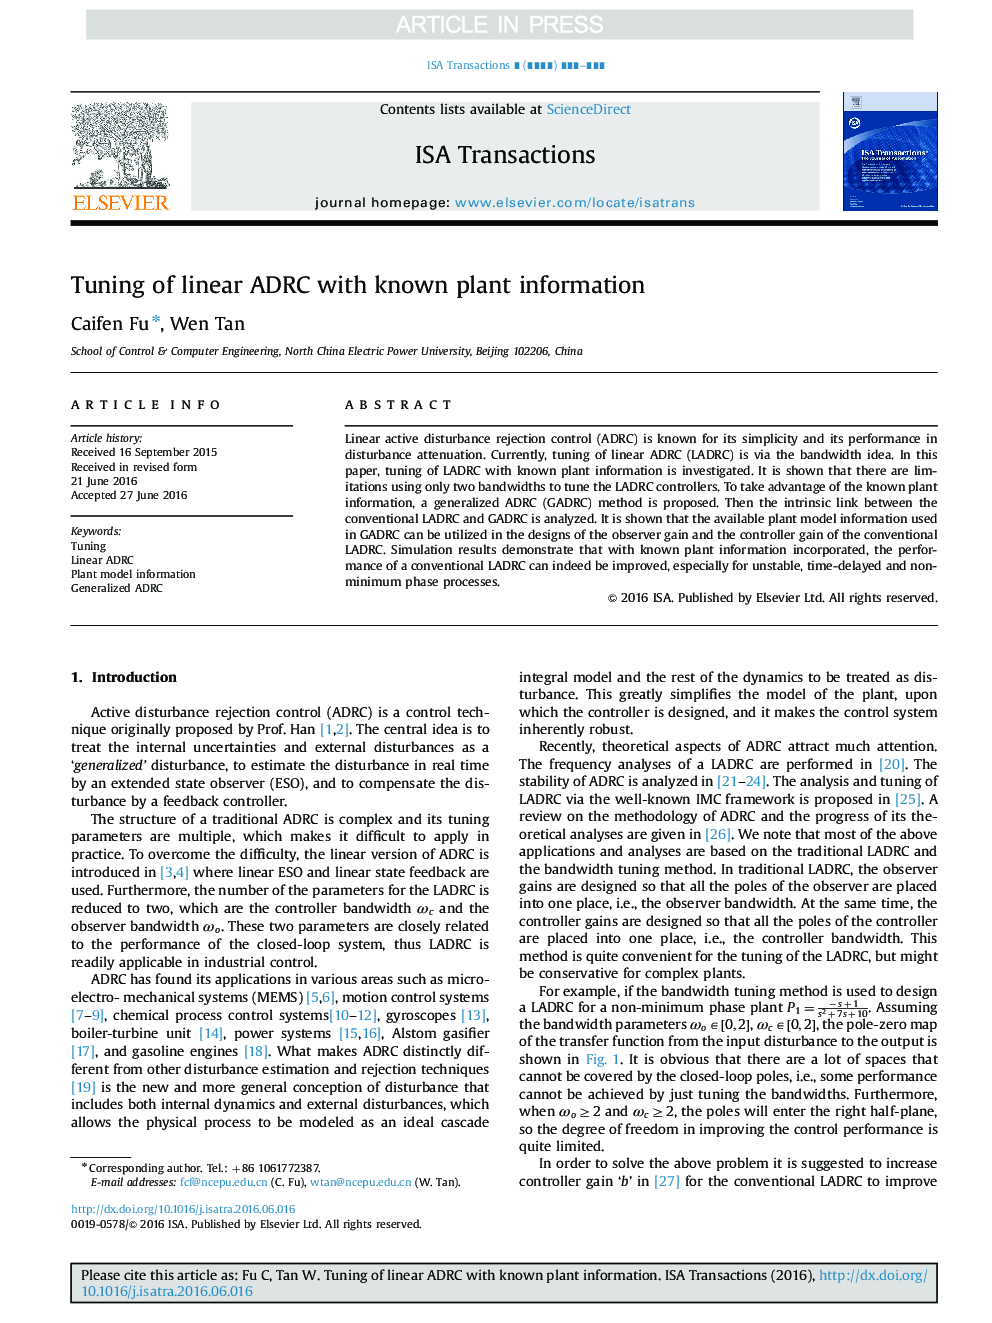 Tuning of linear ADRC with known plant information